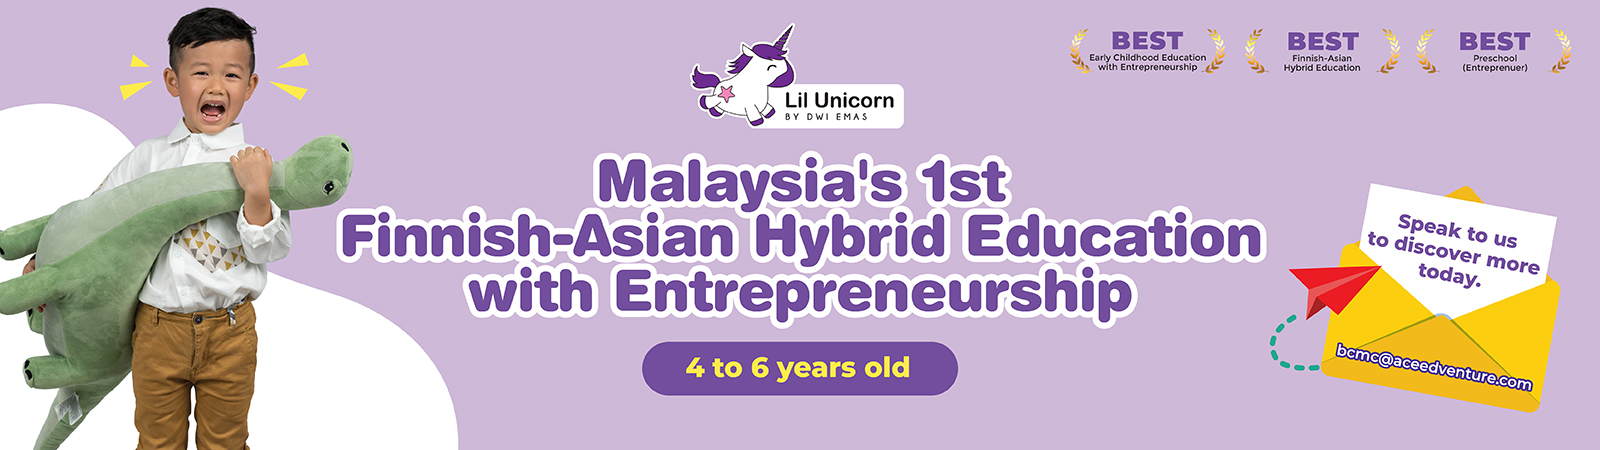 Parents are raving about Lil Unicorn by Dwi Emas; Find out why!